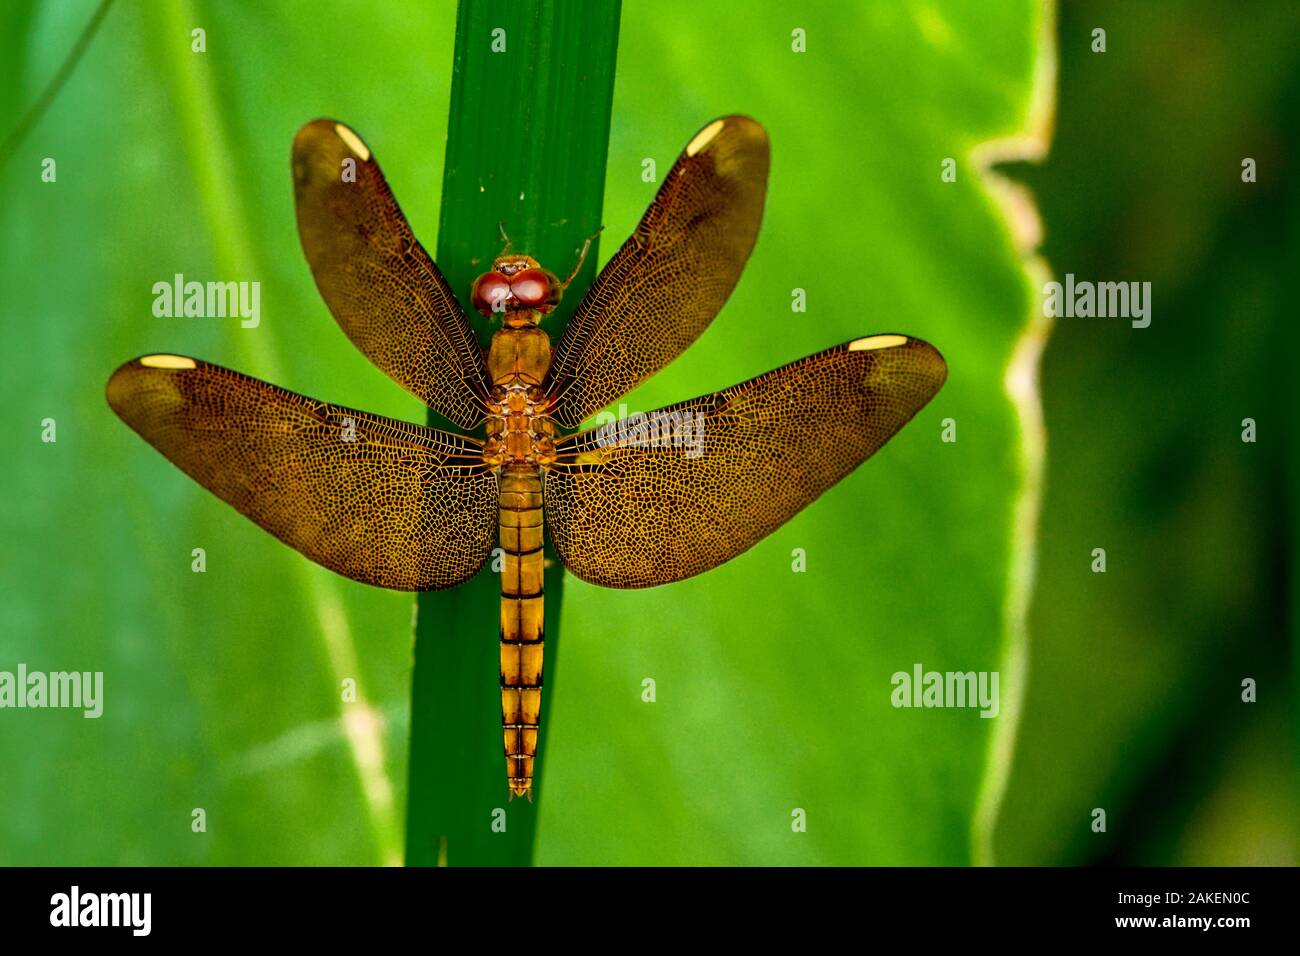 Fulvous forest skimmer, or Russet percher dragonfly (Neurothemis fulvia) female, Sai Kung, Hong Kong, China. Stock Photo